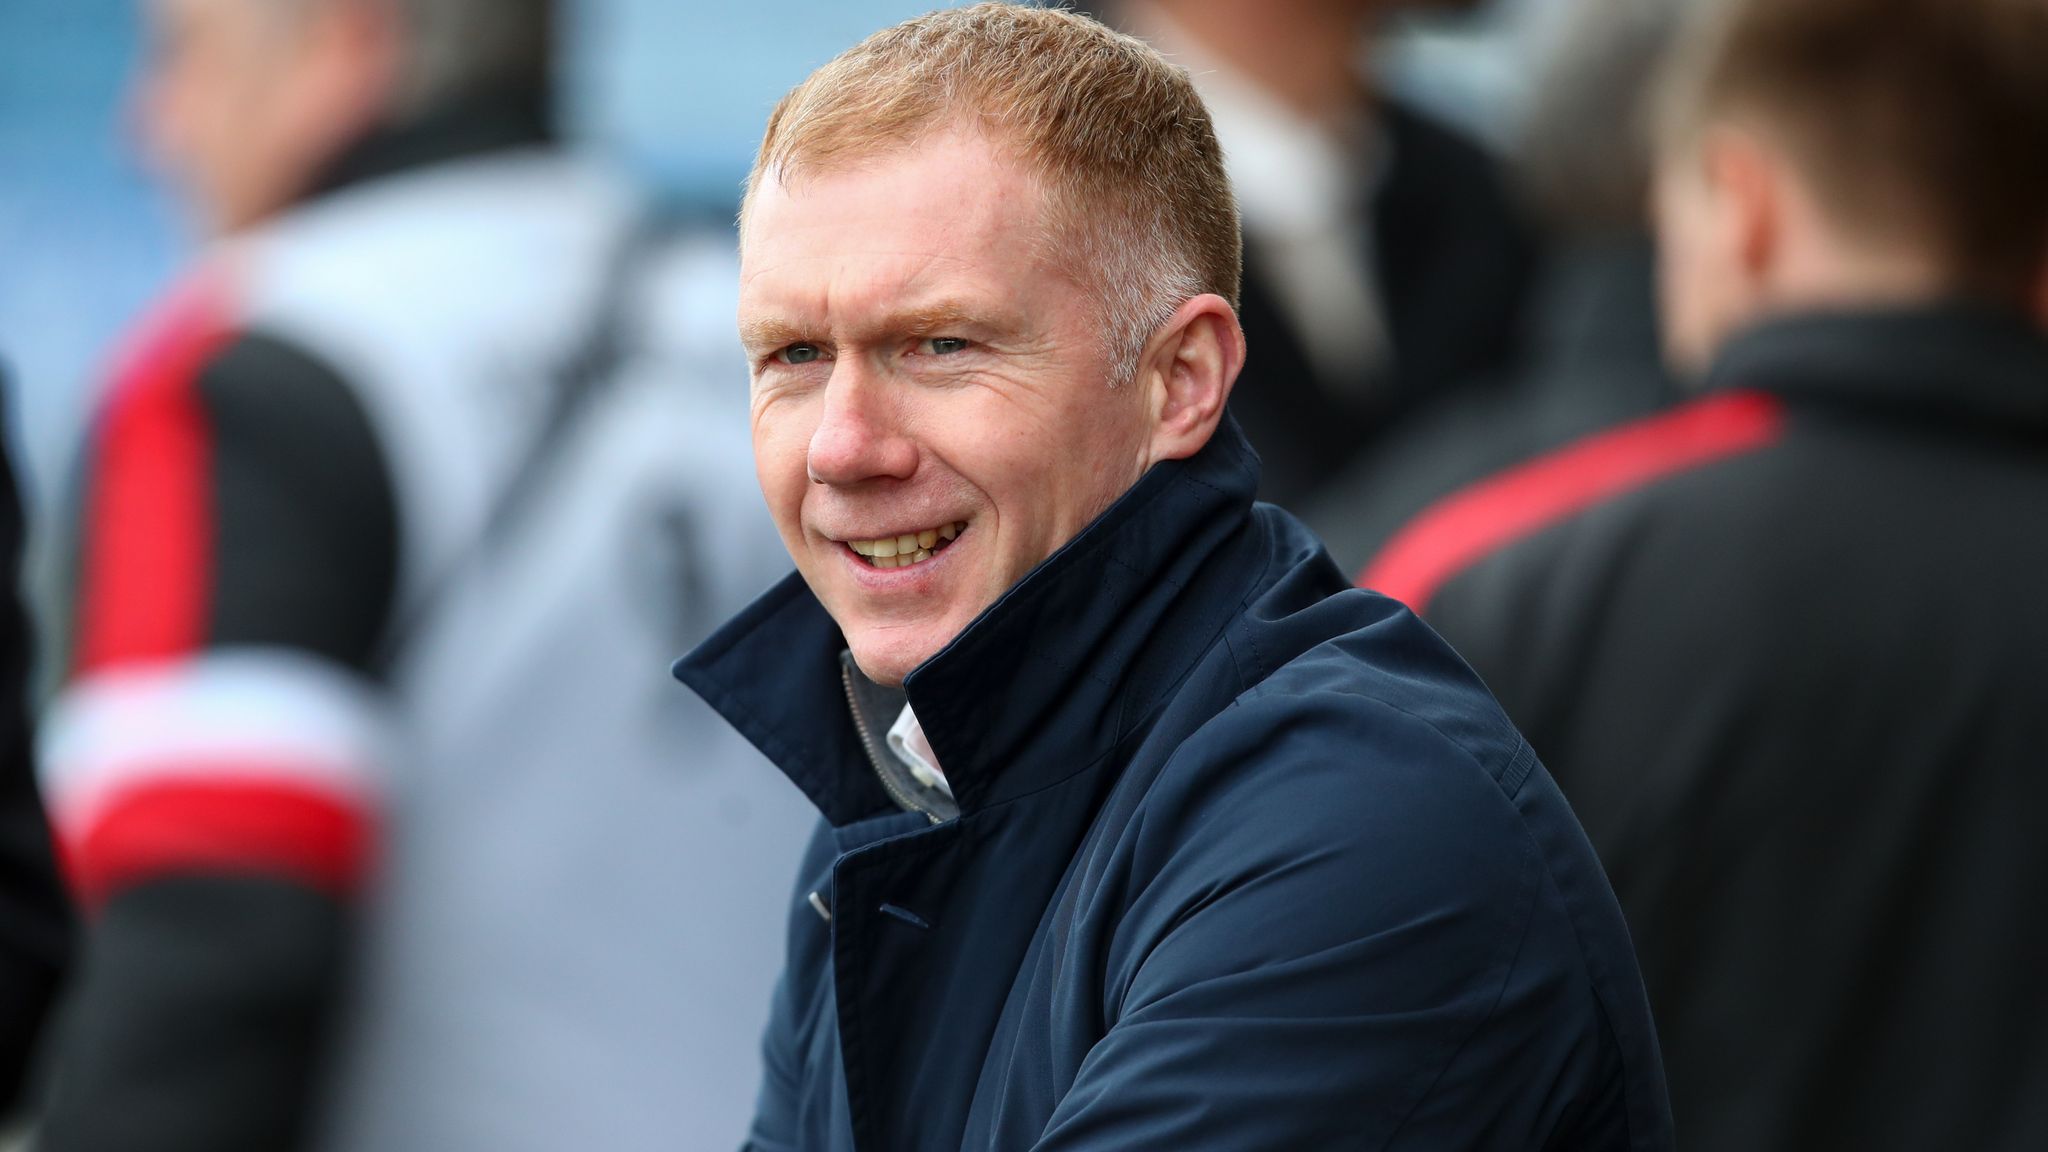 Paul Scholes compares Manchester United star to Gattuso after sensational performance